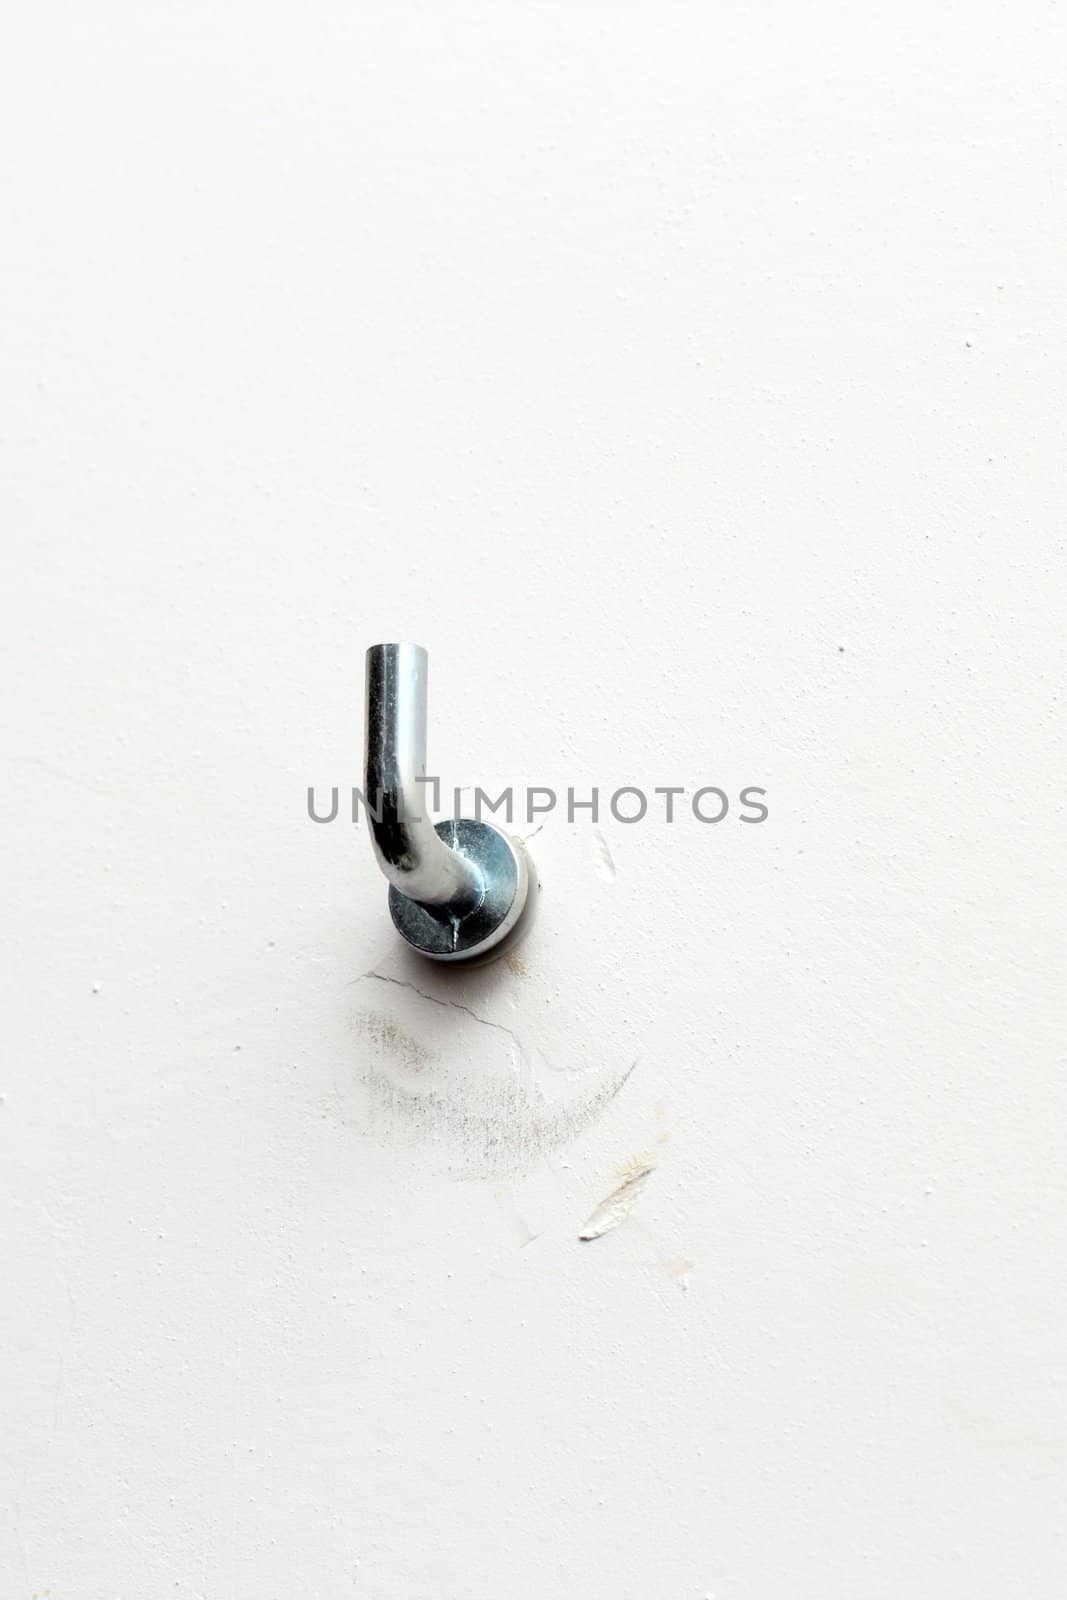 painting hanger on white wall by taviphoto